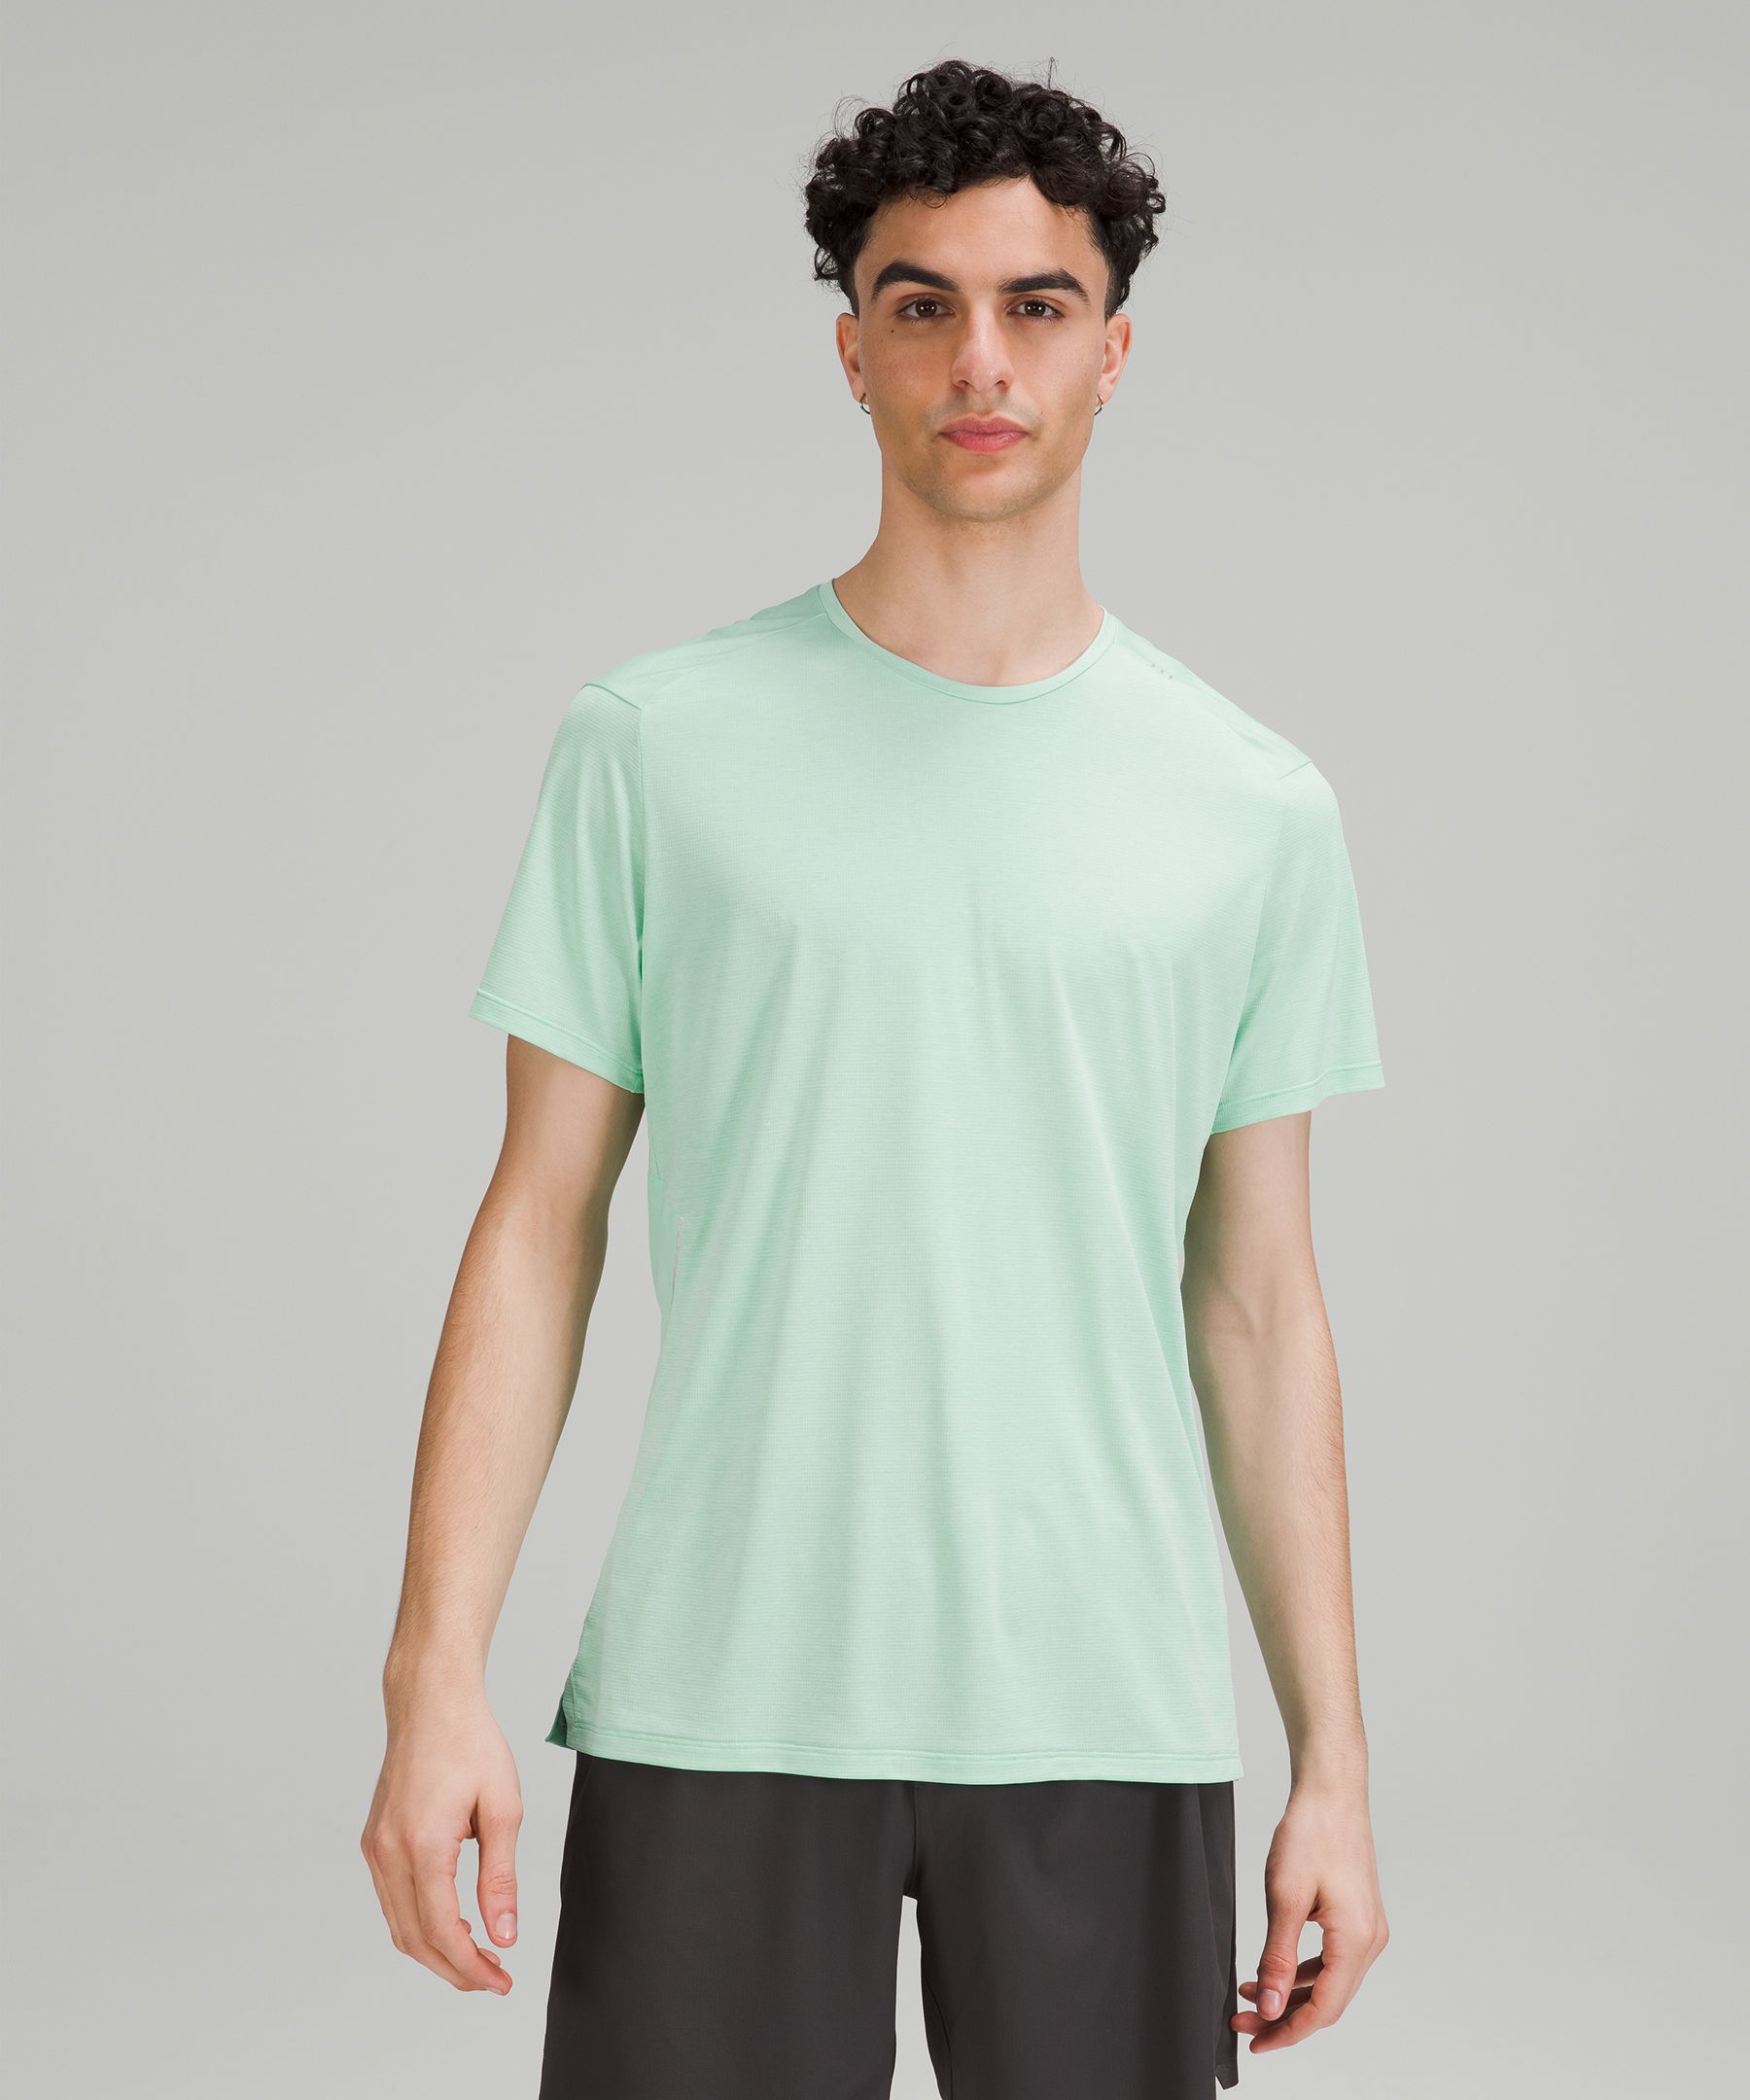 Lululemon Fast And Free Short Sleeve Shirt In Heathered Wild Mint/wild Mint